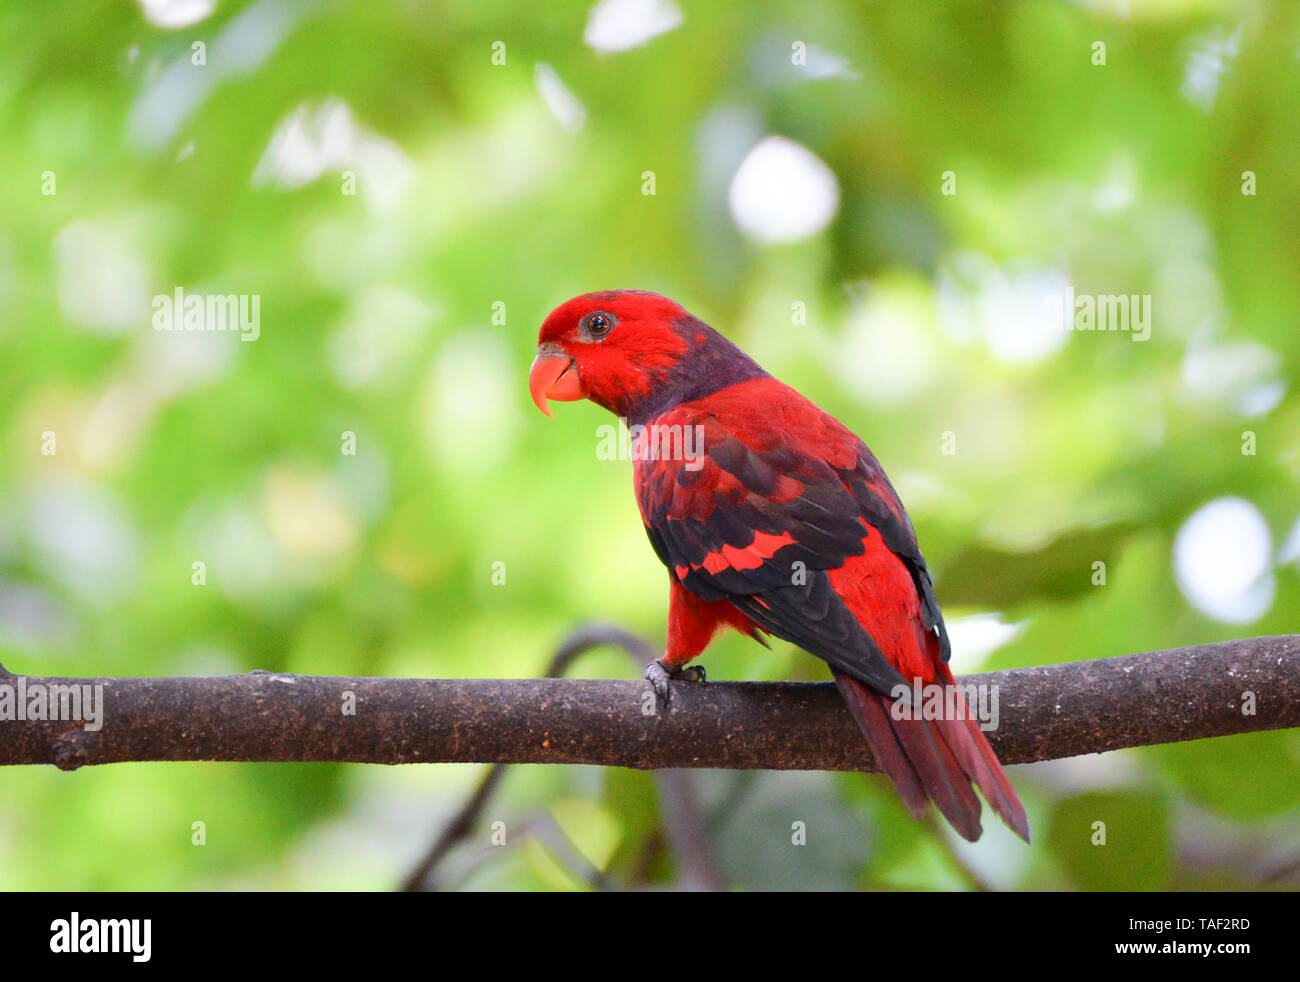 Red Lory parrot bird standing on branch tree nuture green background Stock Photo